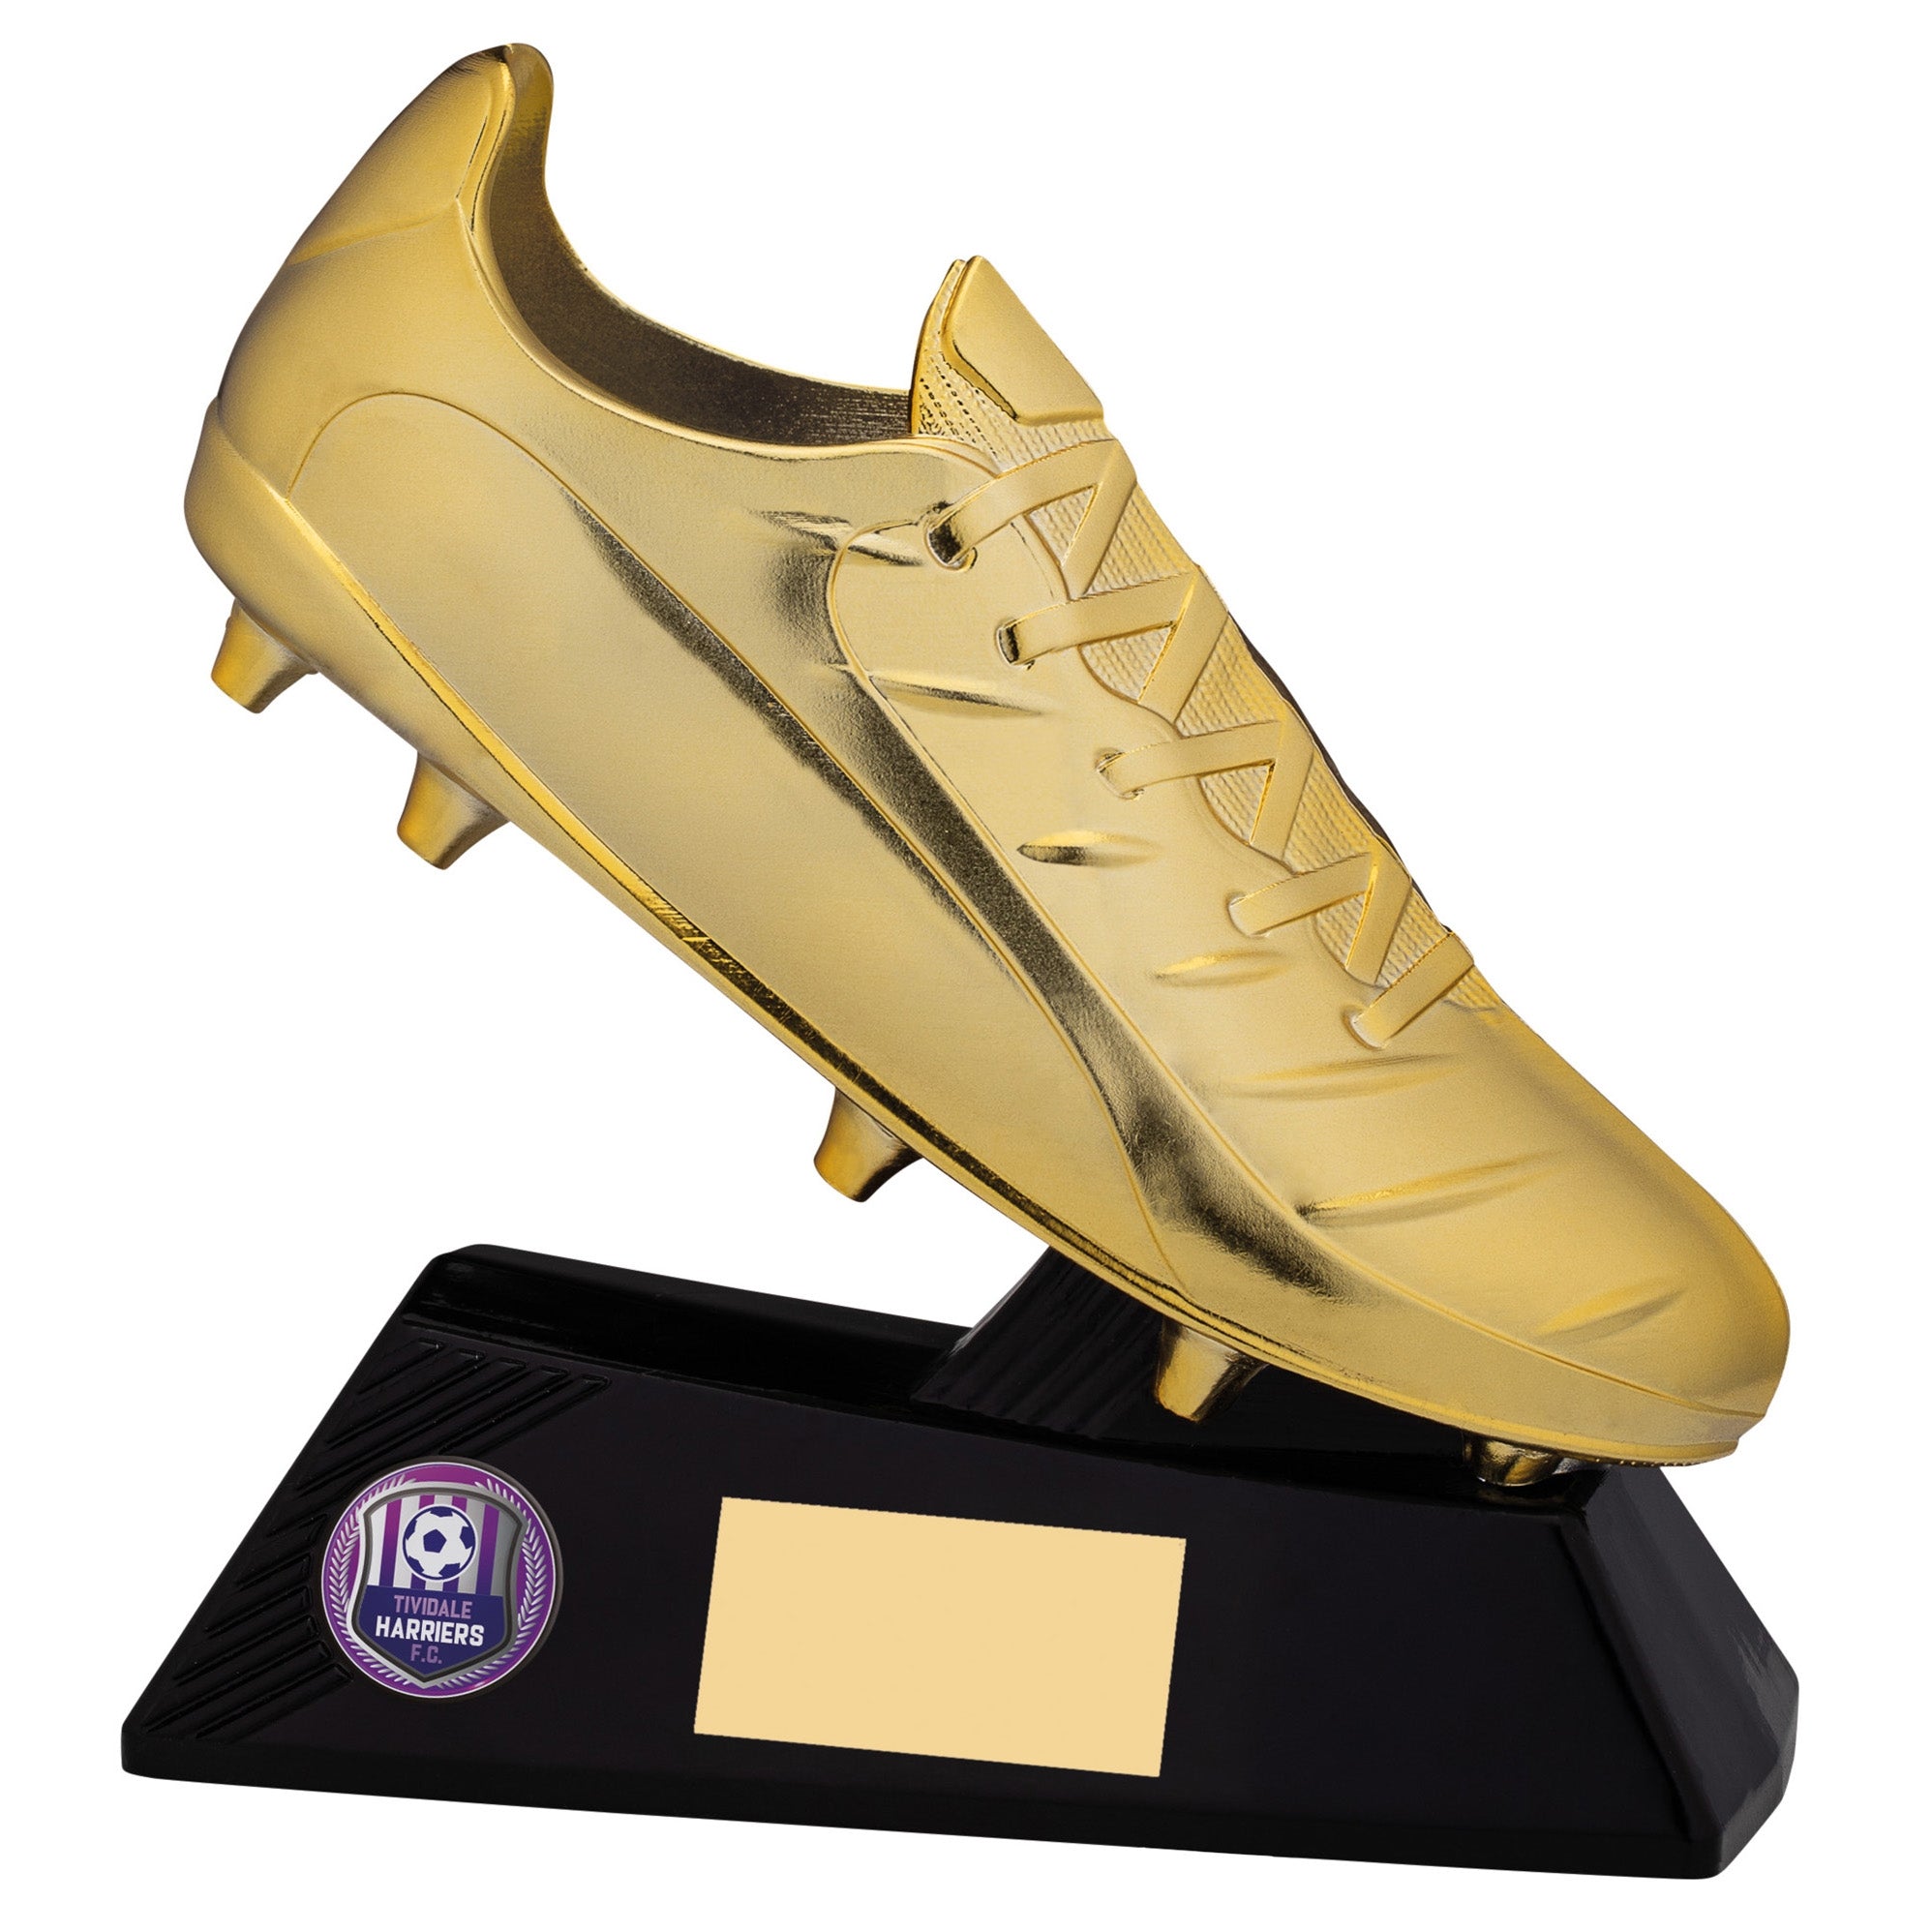 Galaxy Golden Boot Personalised Football Trophy